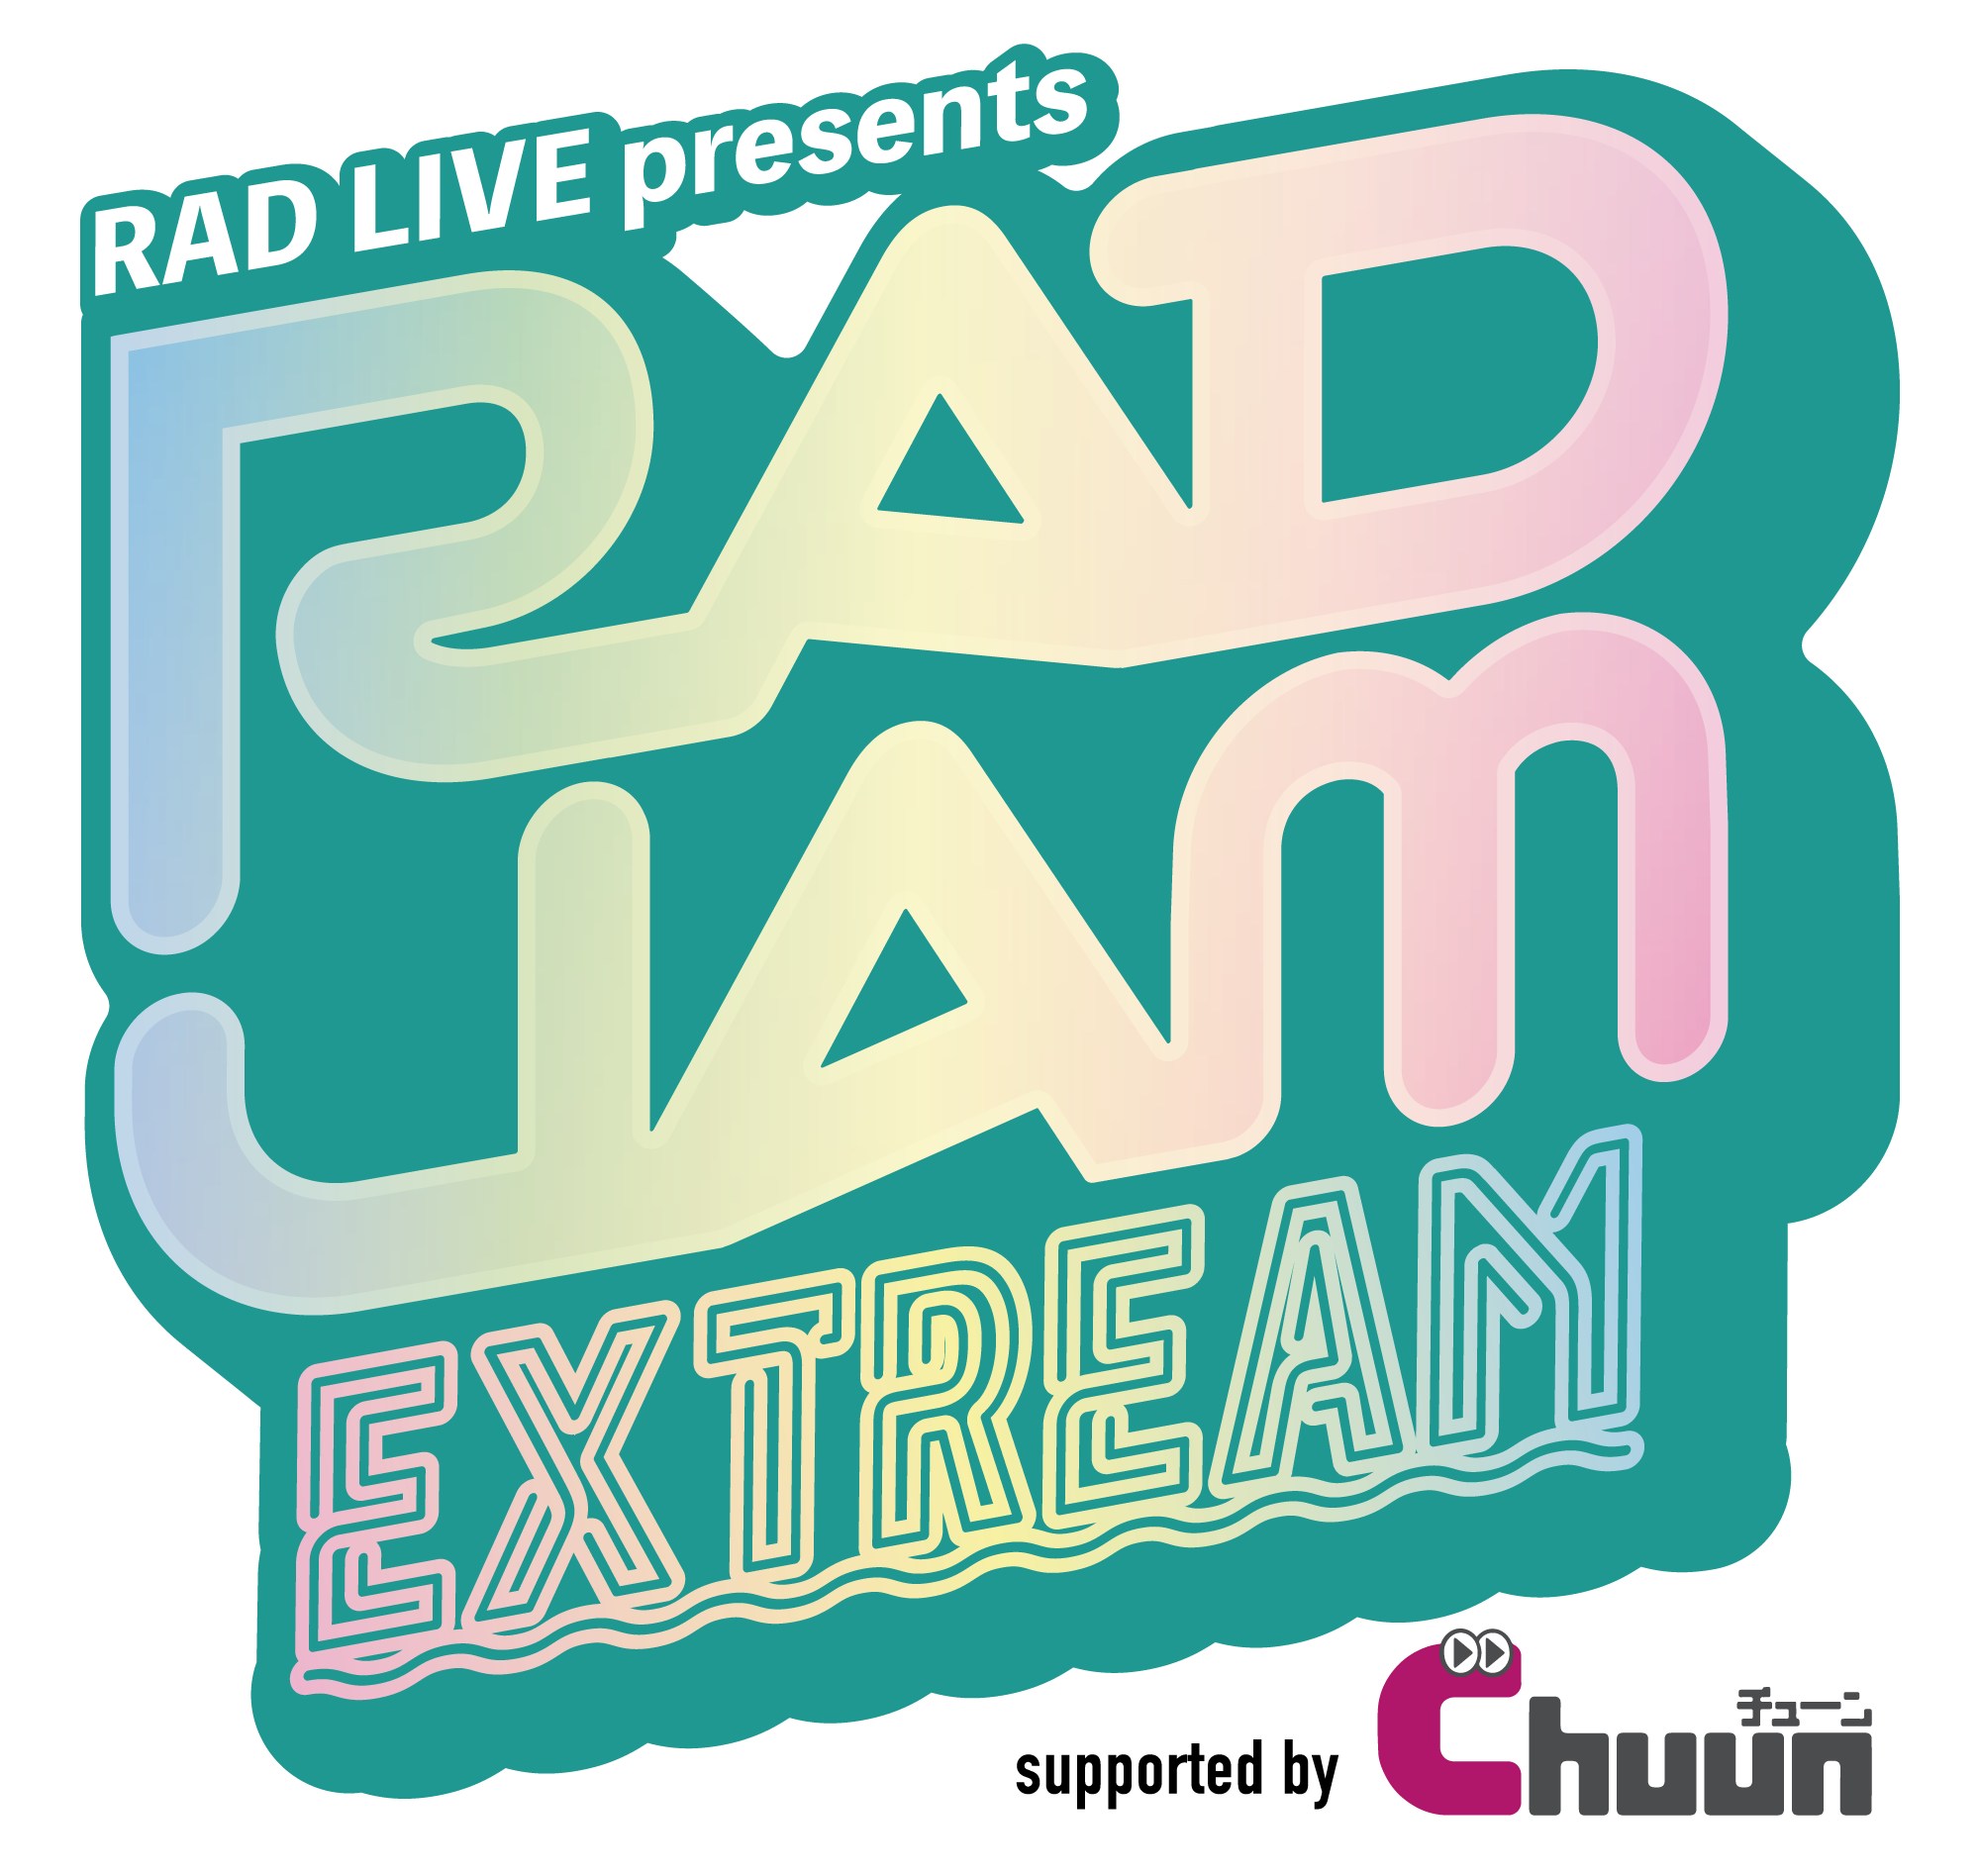 RAD JAM EXTREAM supported by Chuun